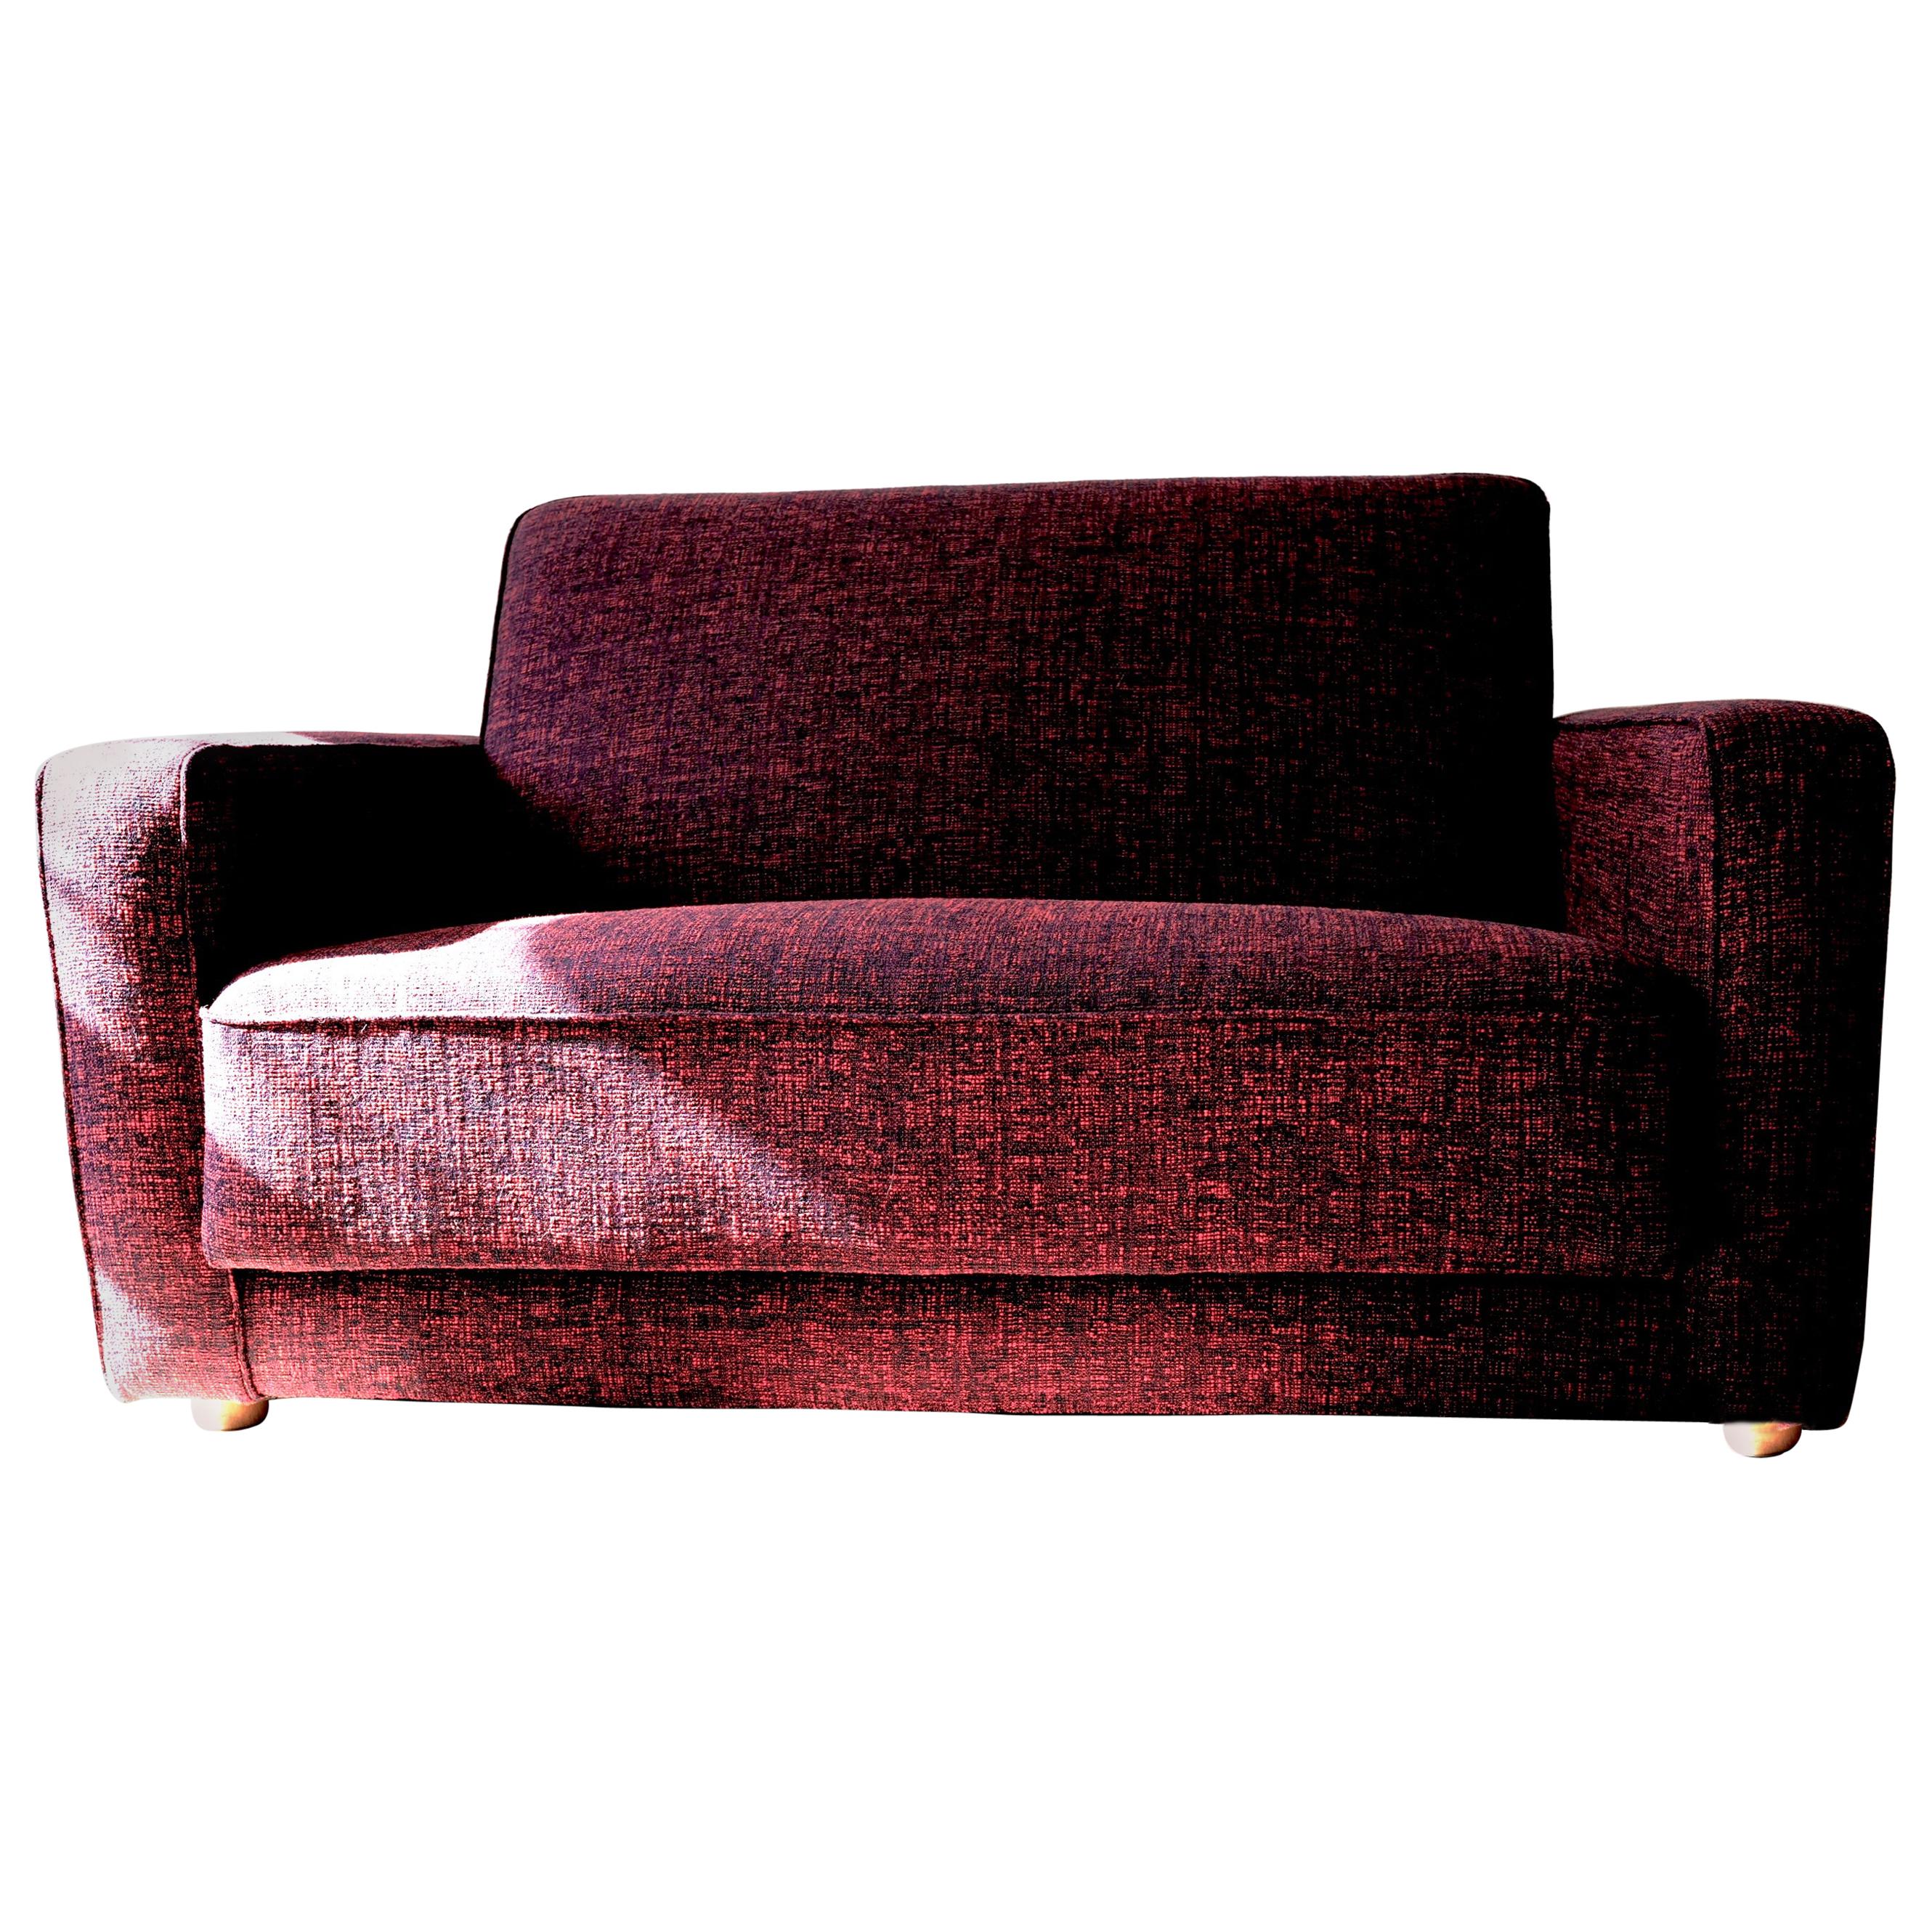 Unique Midcentury Sofa Upholstered with Raf Simons Fabric, Switzerland For Sale